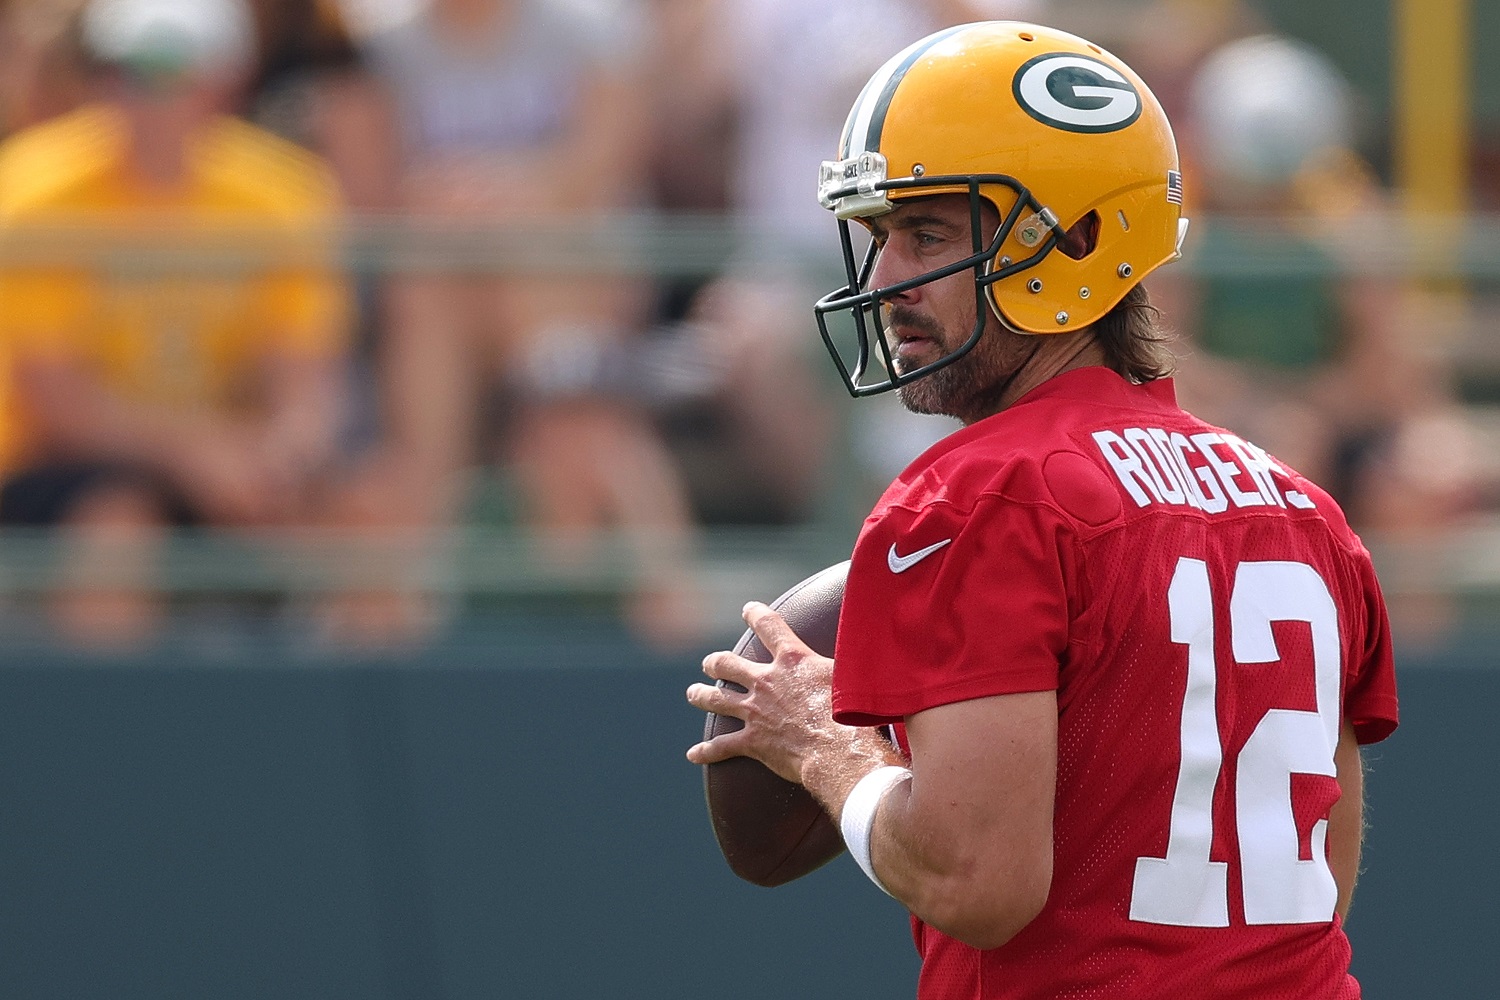 Aaron Rodgers of the Green Bay Packers works out during training camp in Ashwaubenon, Wisconsin. | Stacy Revere/Getty Images